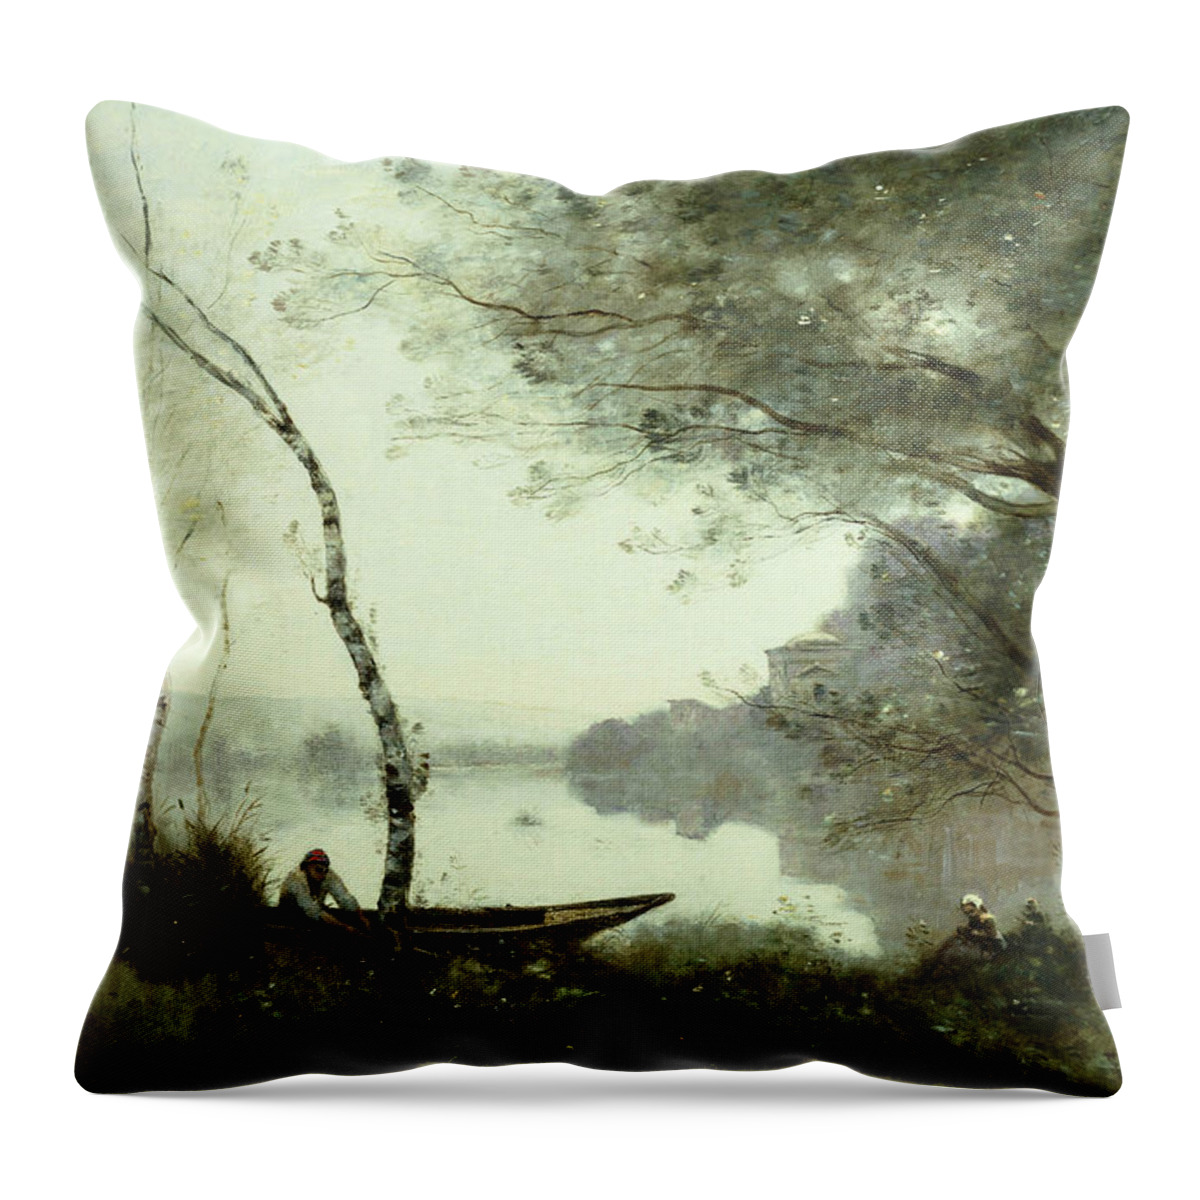 Jean-baptiste-camille Corot Throw Pillow featuring the painting The Boatman of Mortefontaine by Jean-Baptiste-Camille Corot